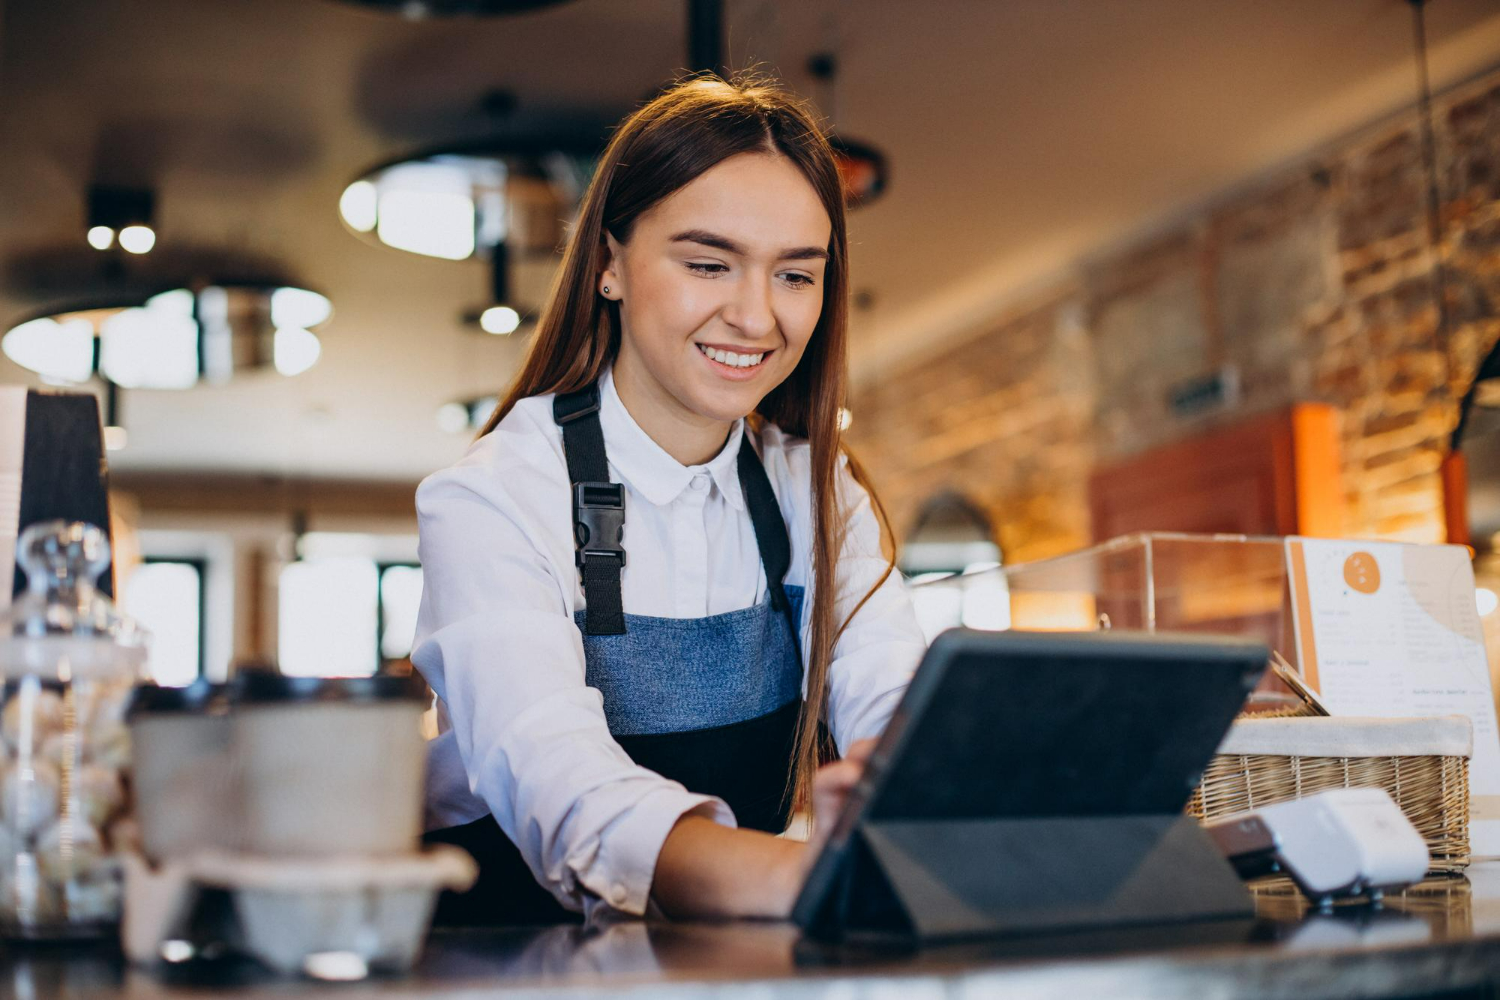 5 Essential tips for effectively training staff on new ePOS systems